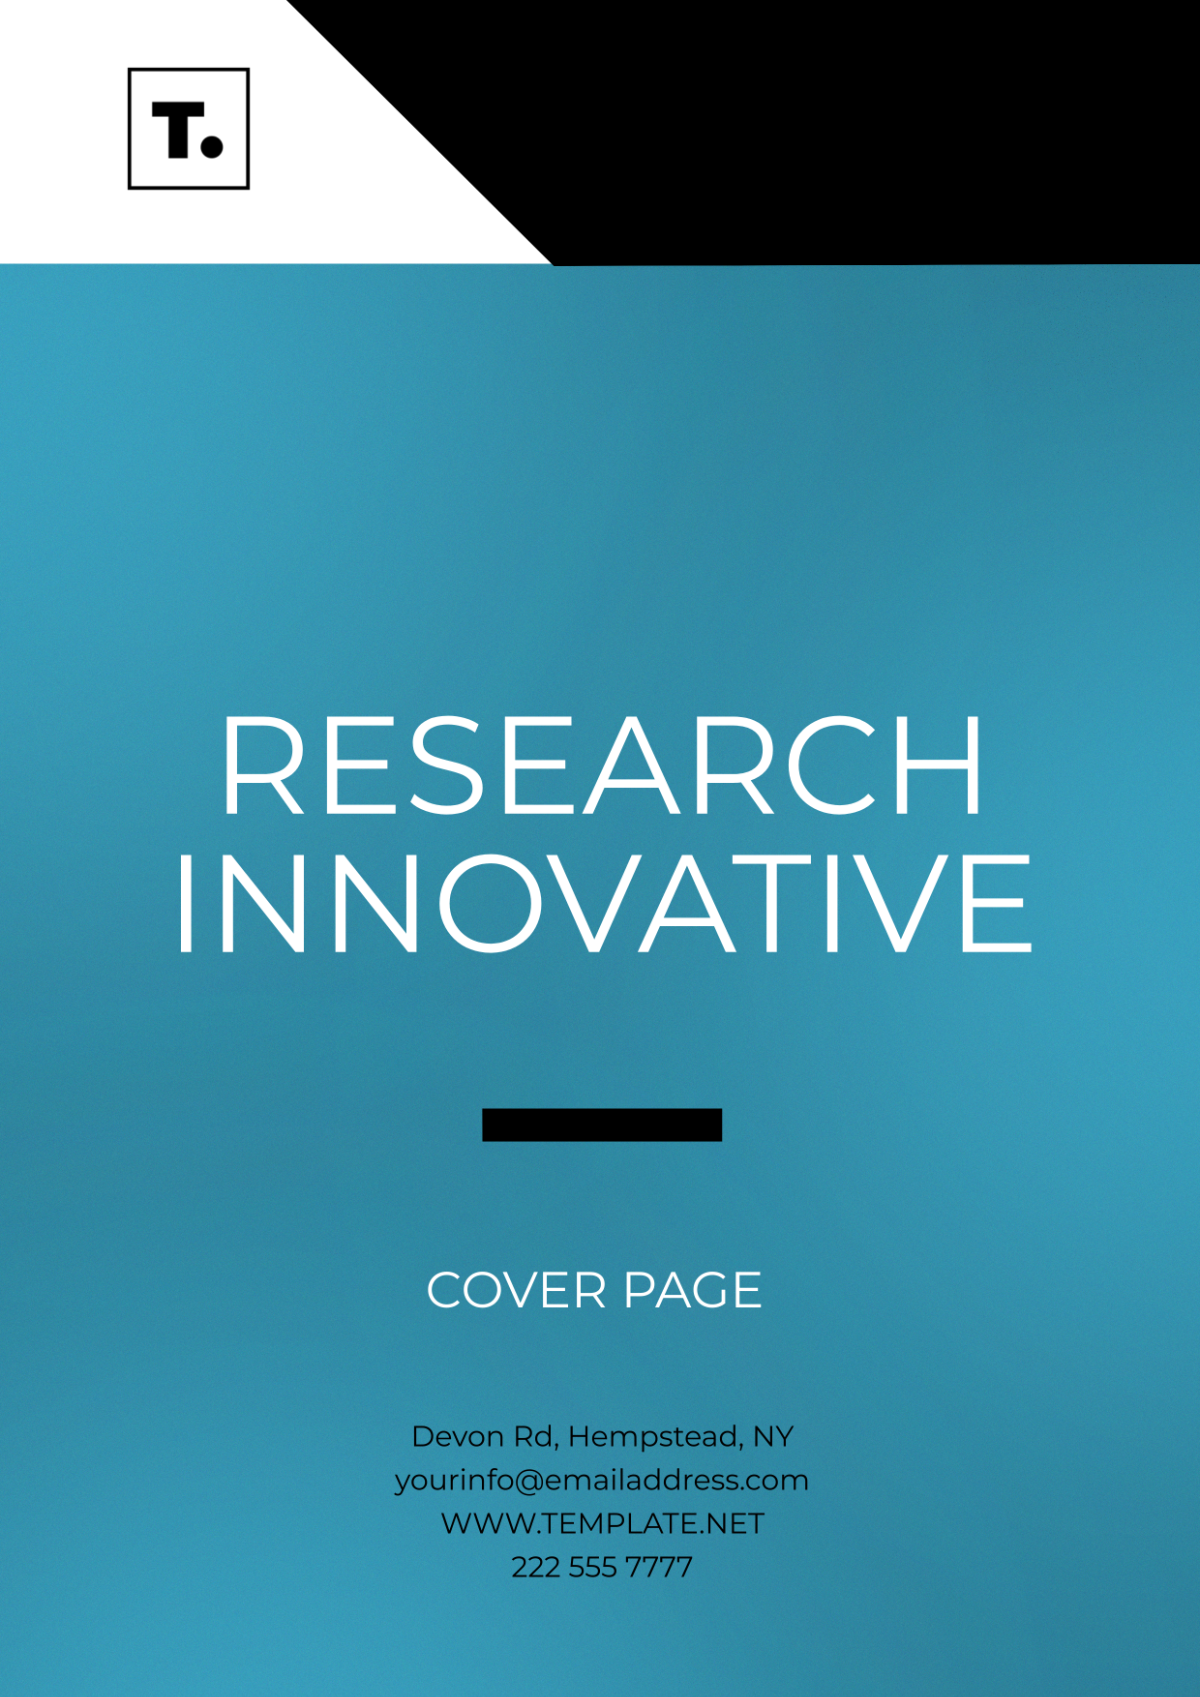 Research Innovative Cover Page